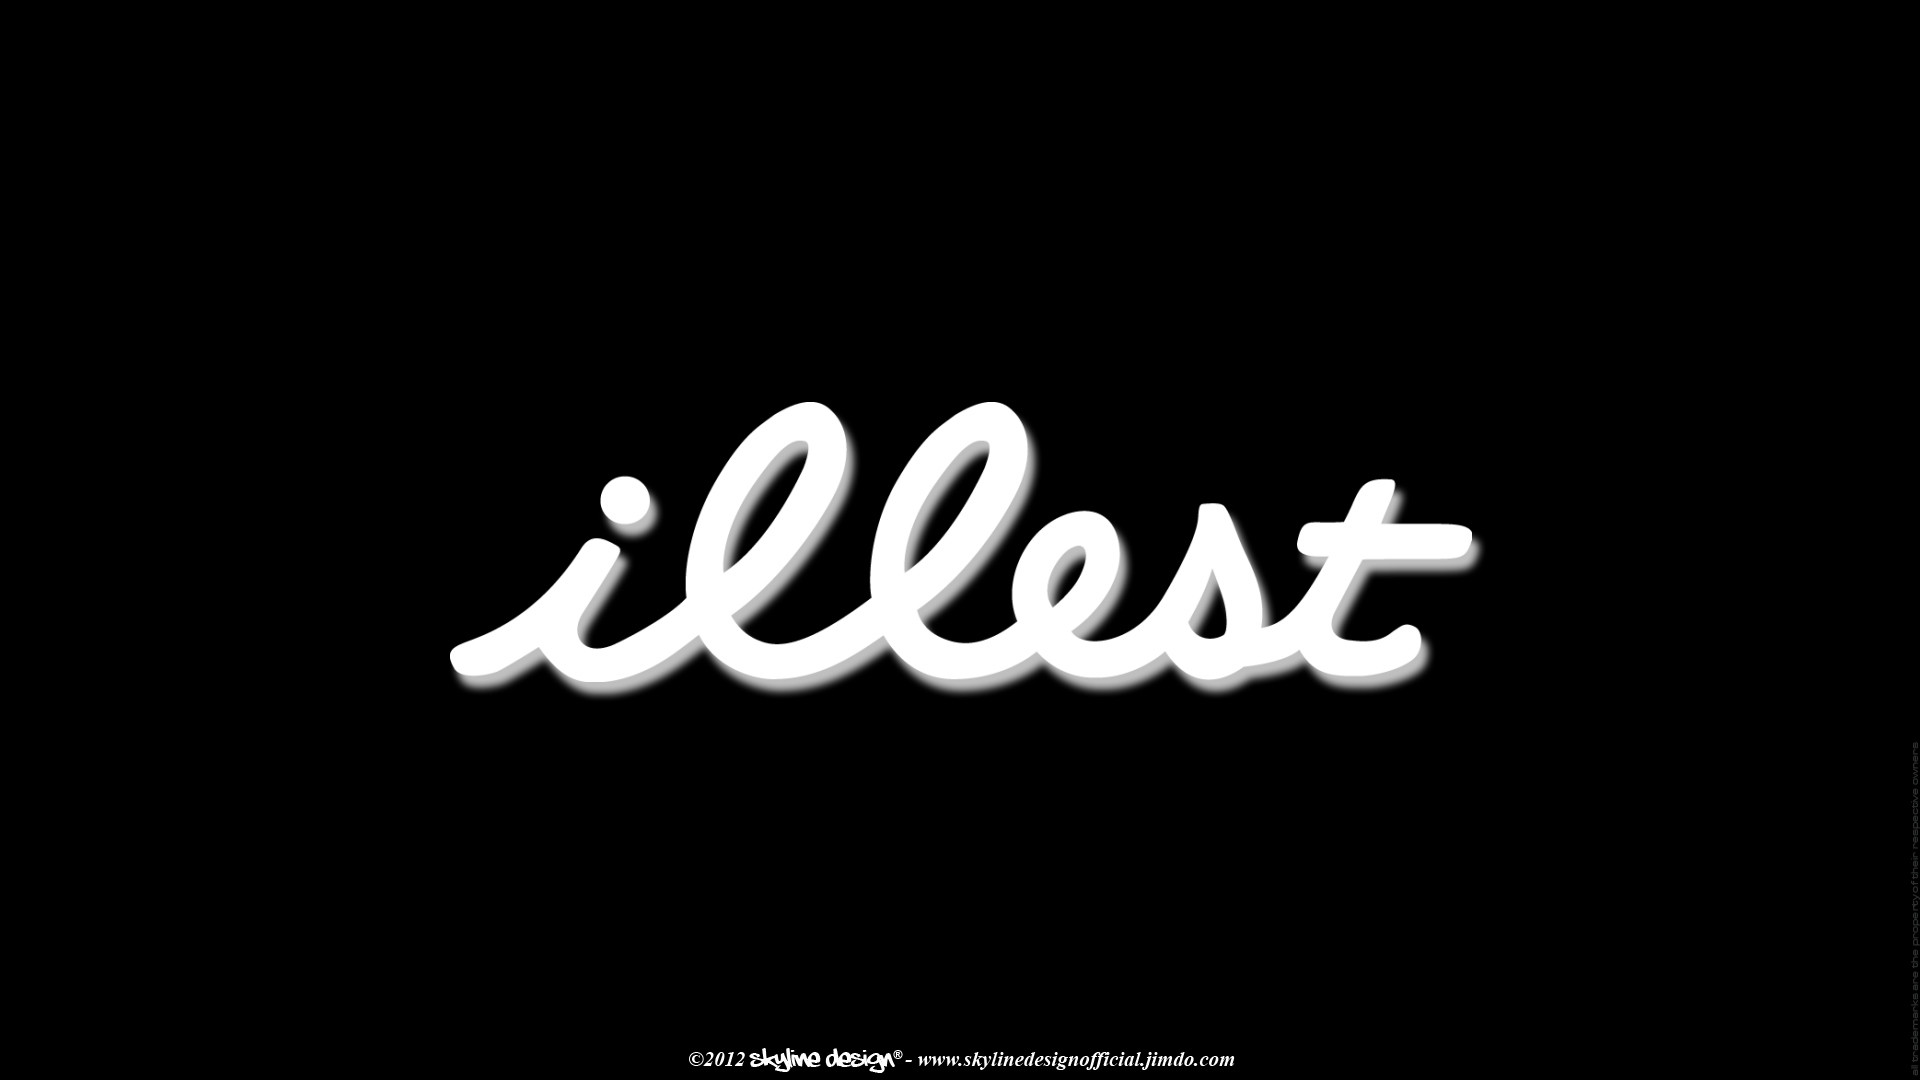 Illest Wallpapers Wallpapertag Images, Photos, Reviews